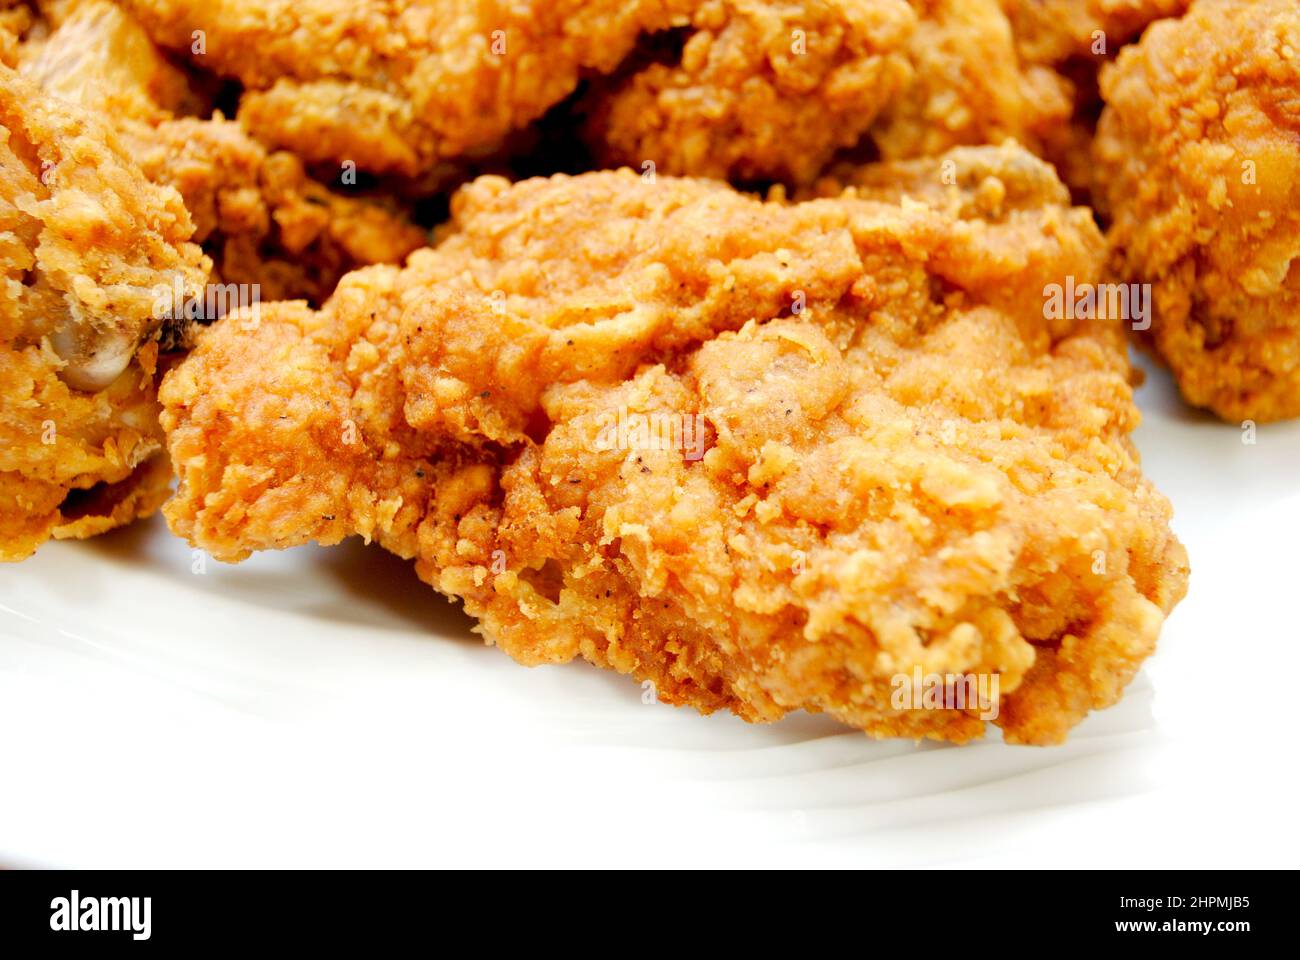 Close Up of a Southern Fried Chicken Thigh on a White Plate Stock Photo